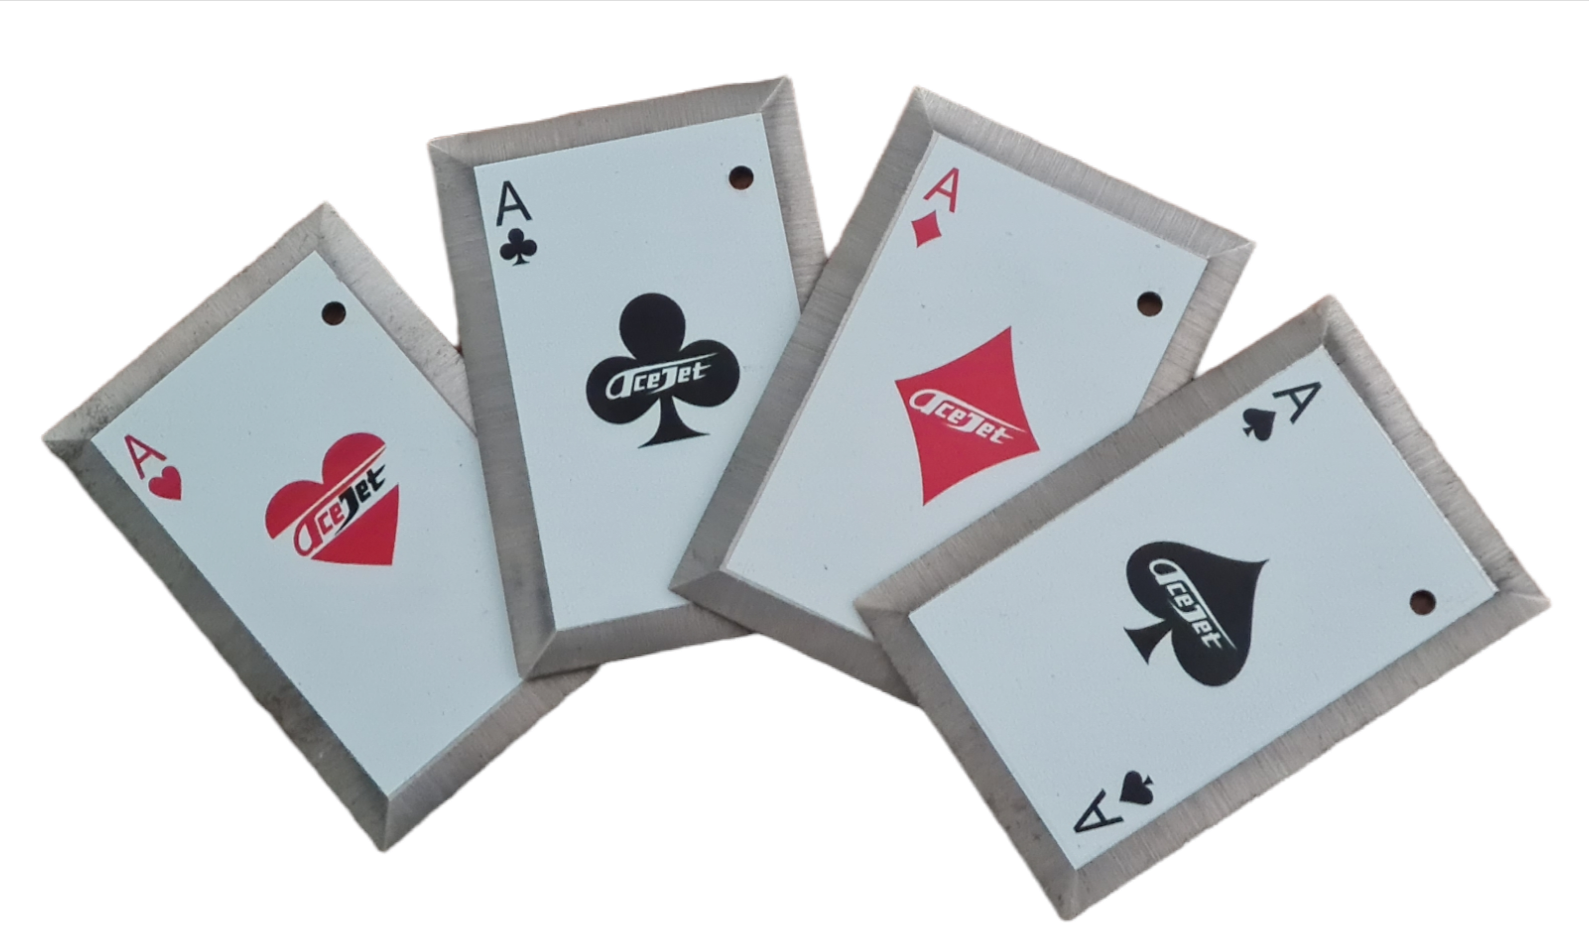 AceJet Steel throwing cards - set of 4 aces